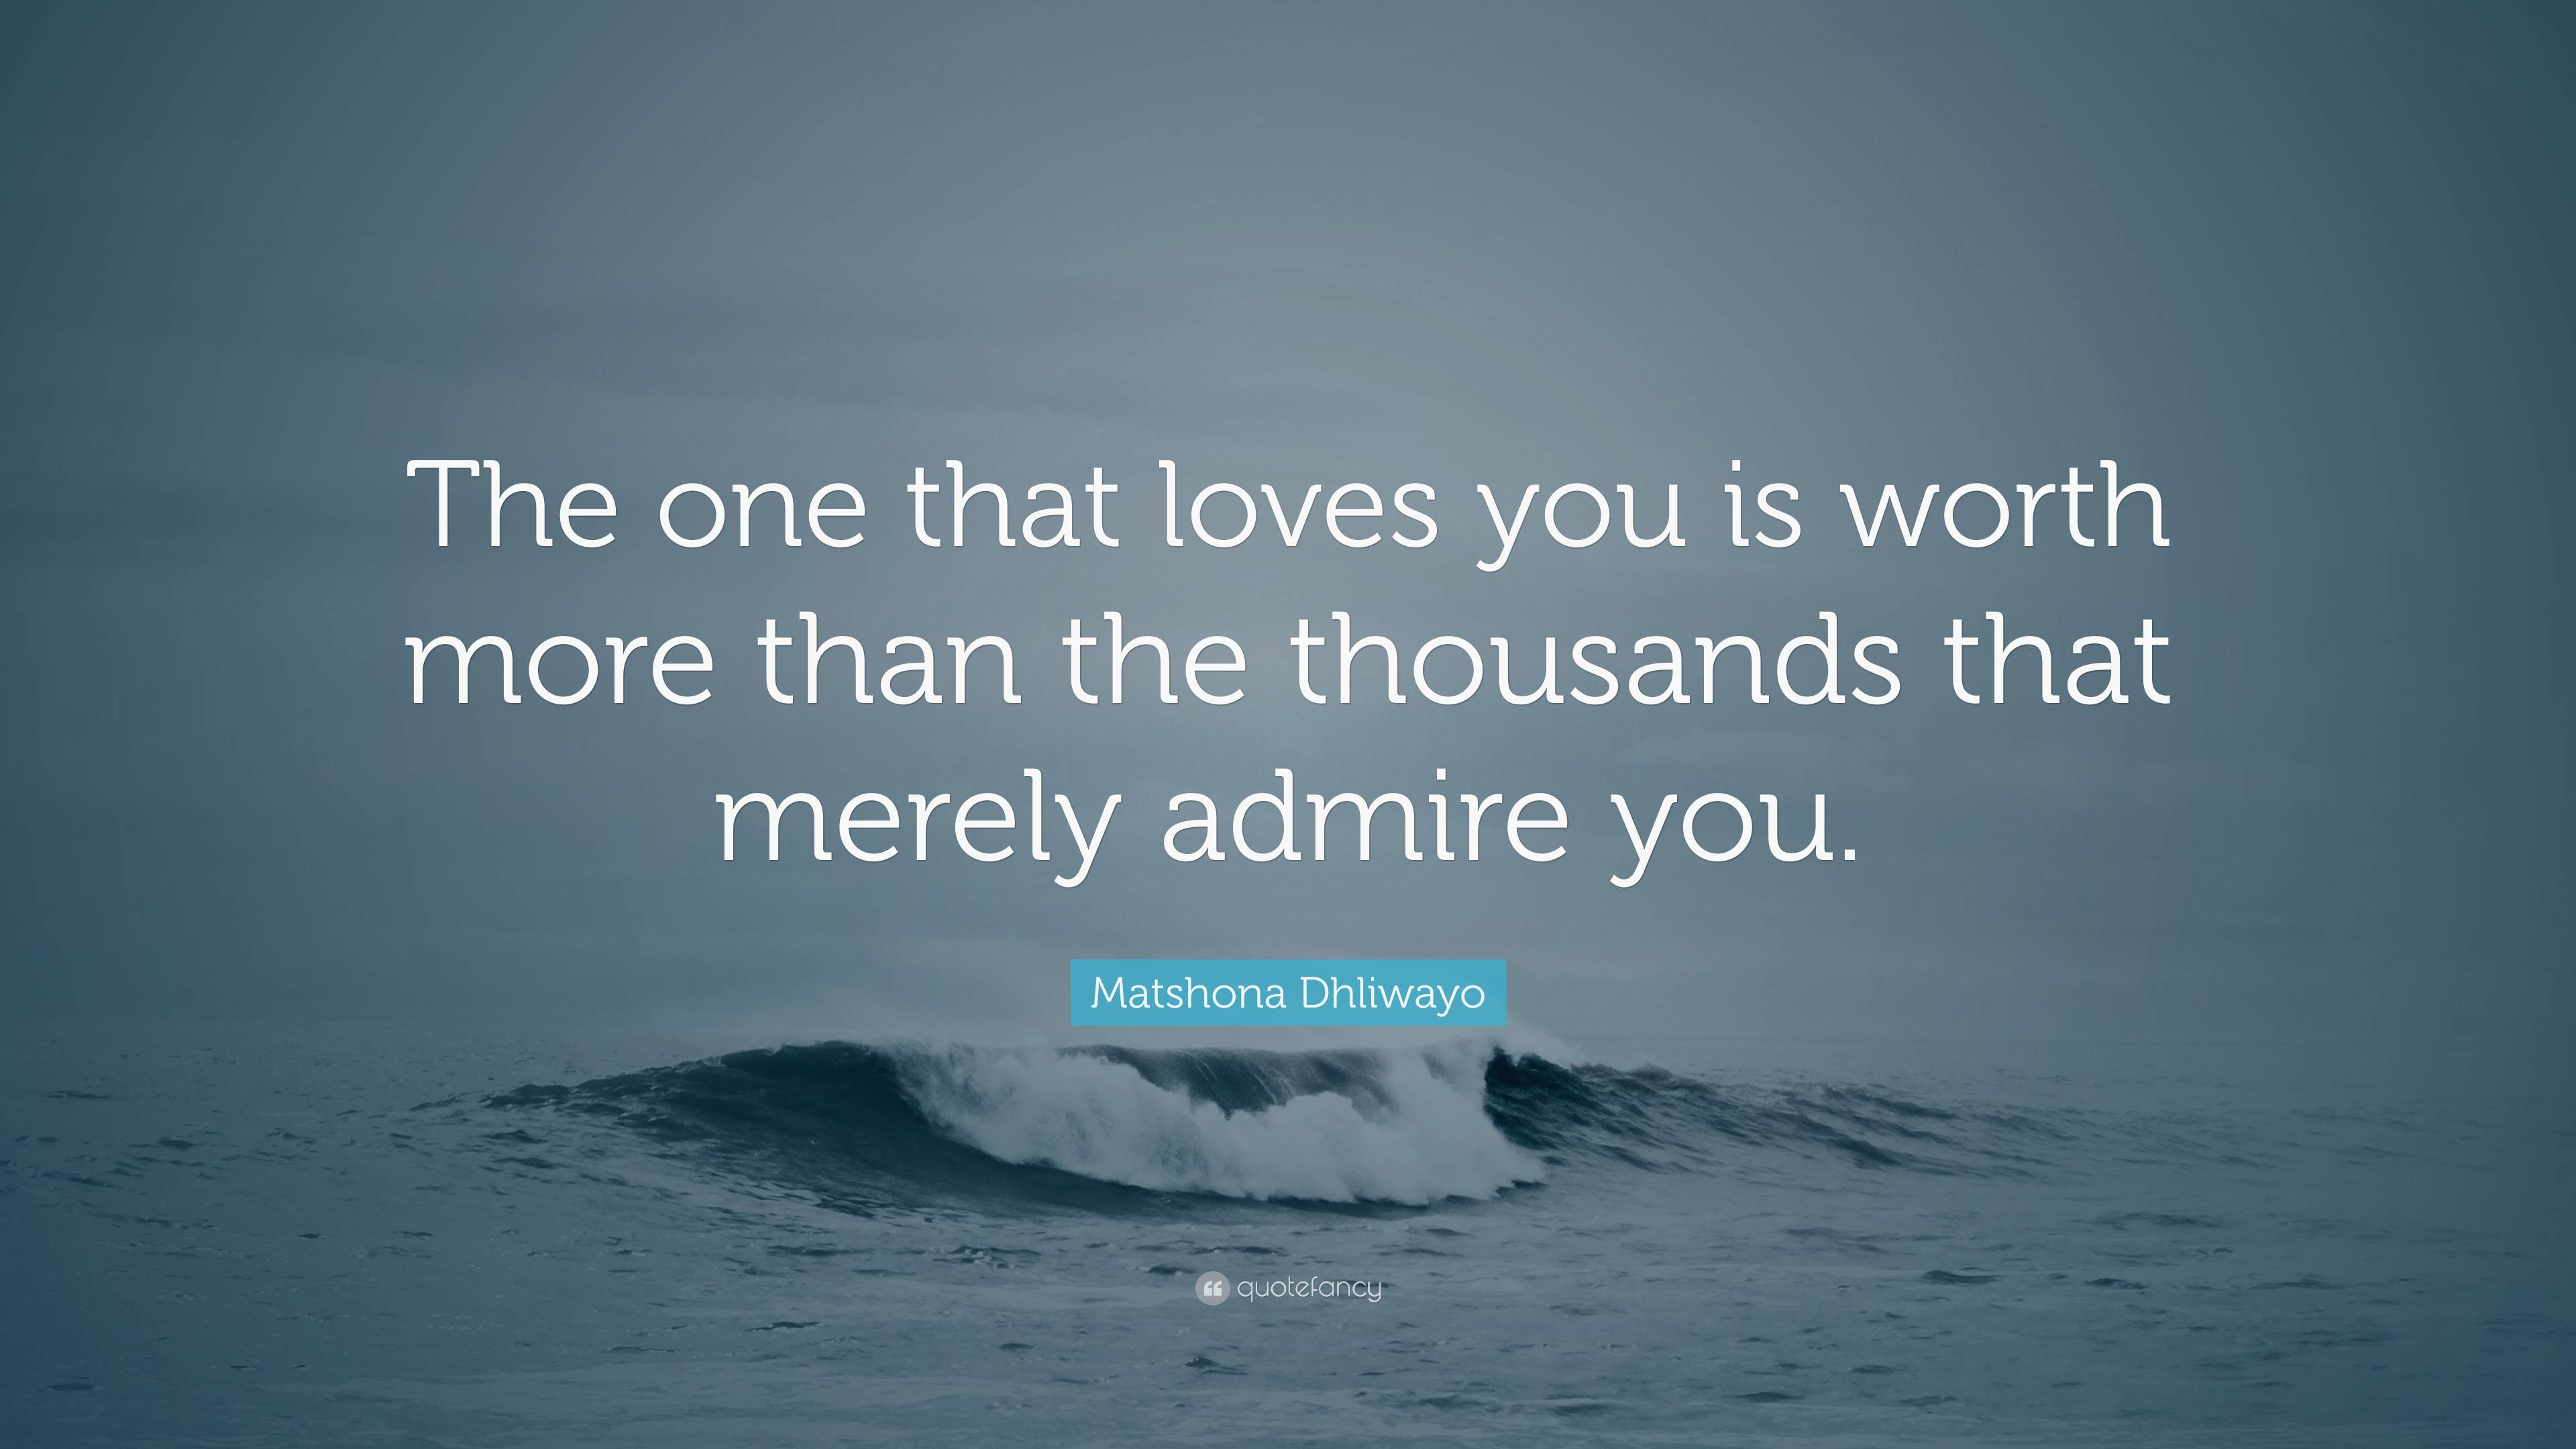 Matshona Dhliwayo Quote: “The one that loves you is worth more than the ...